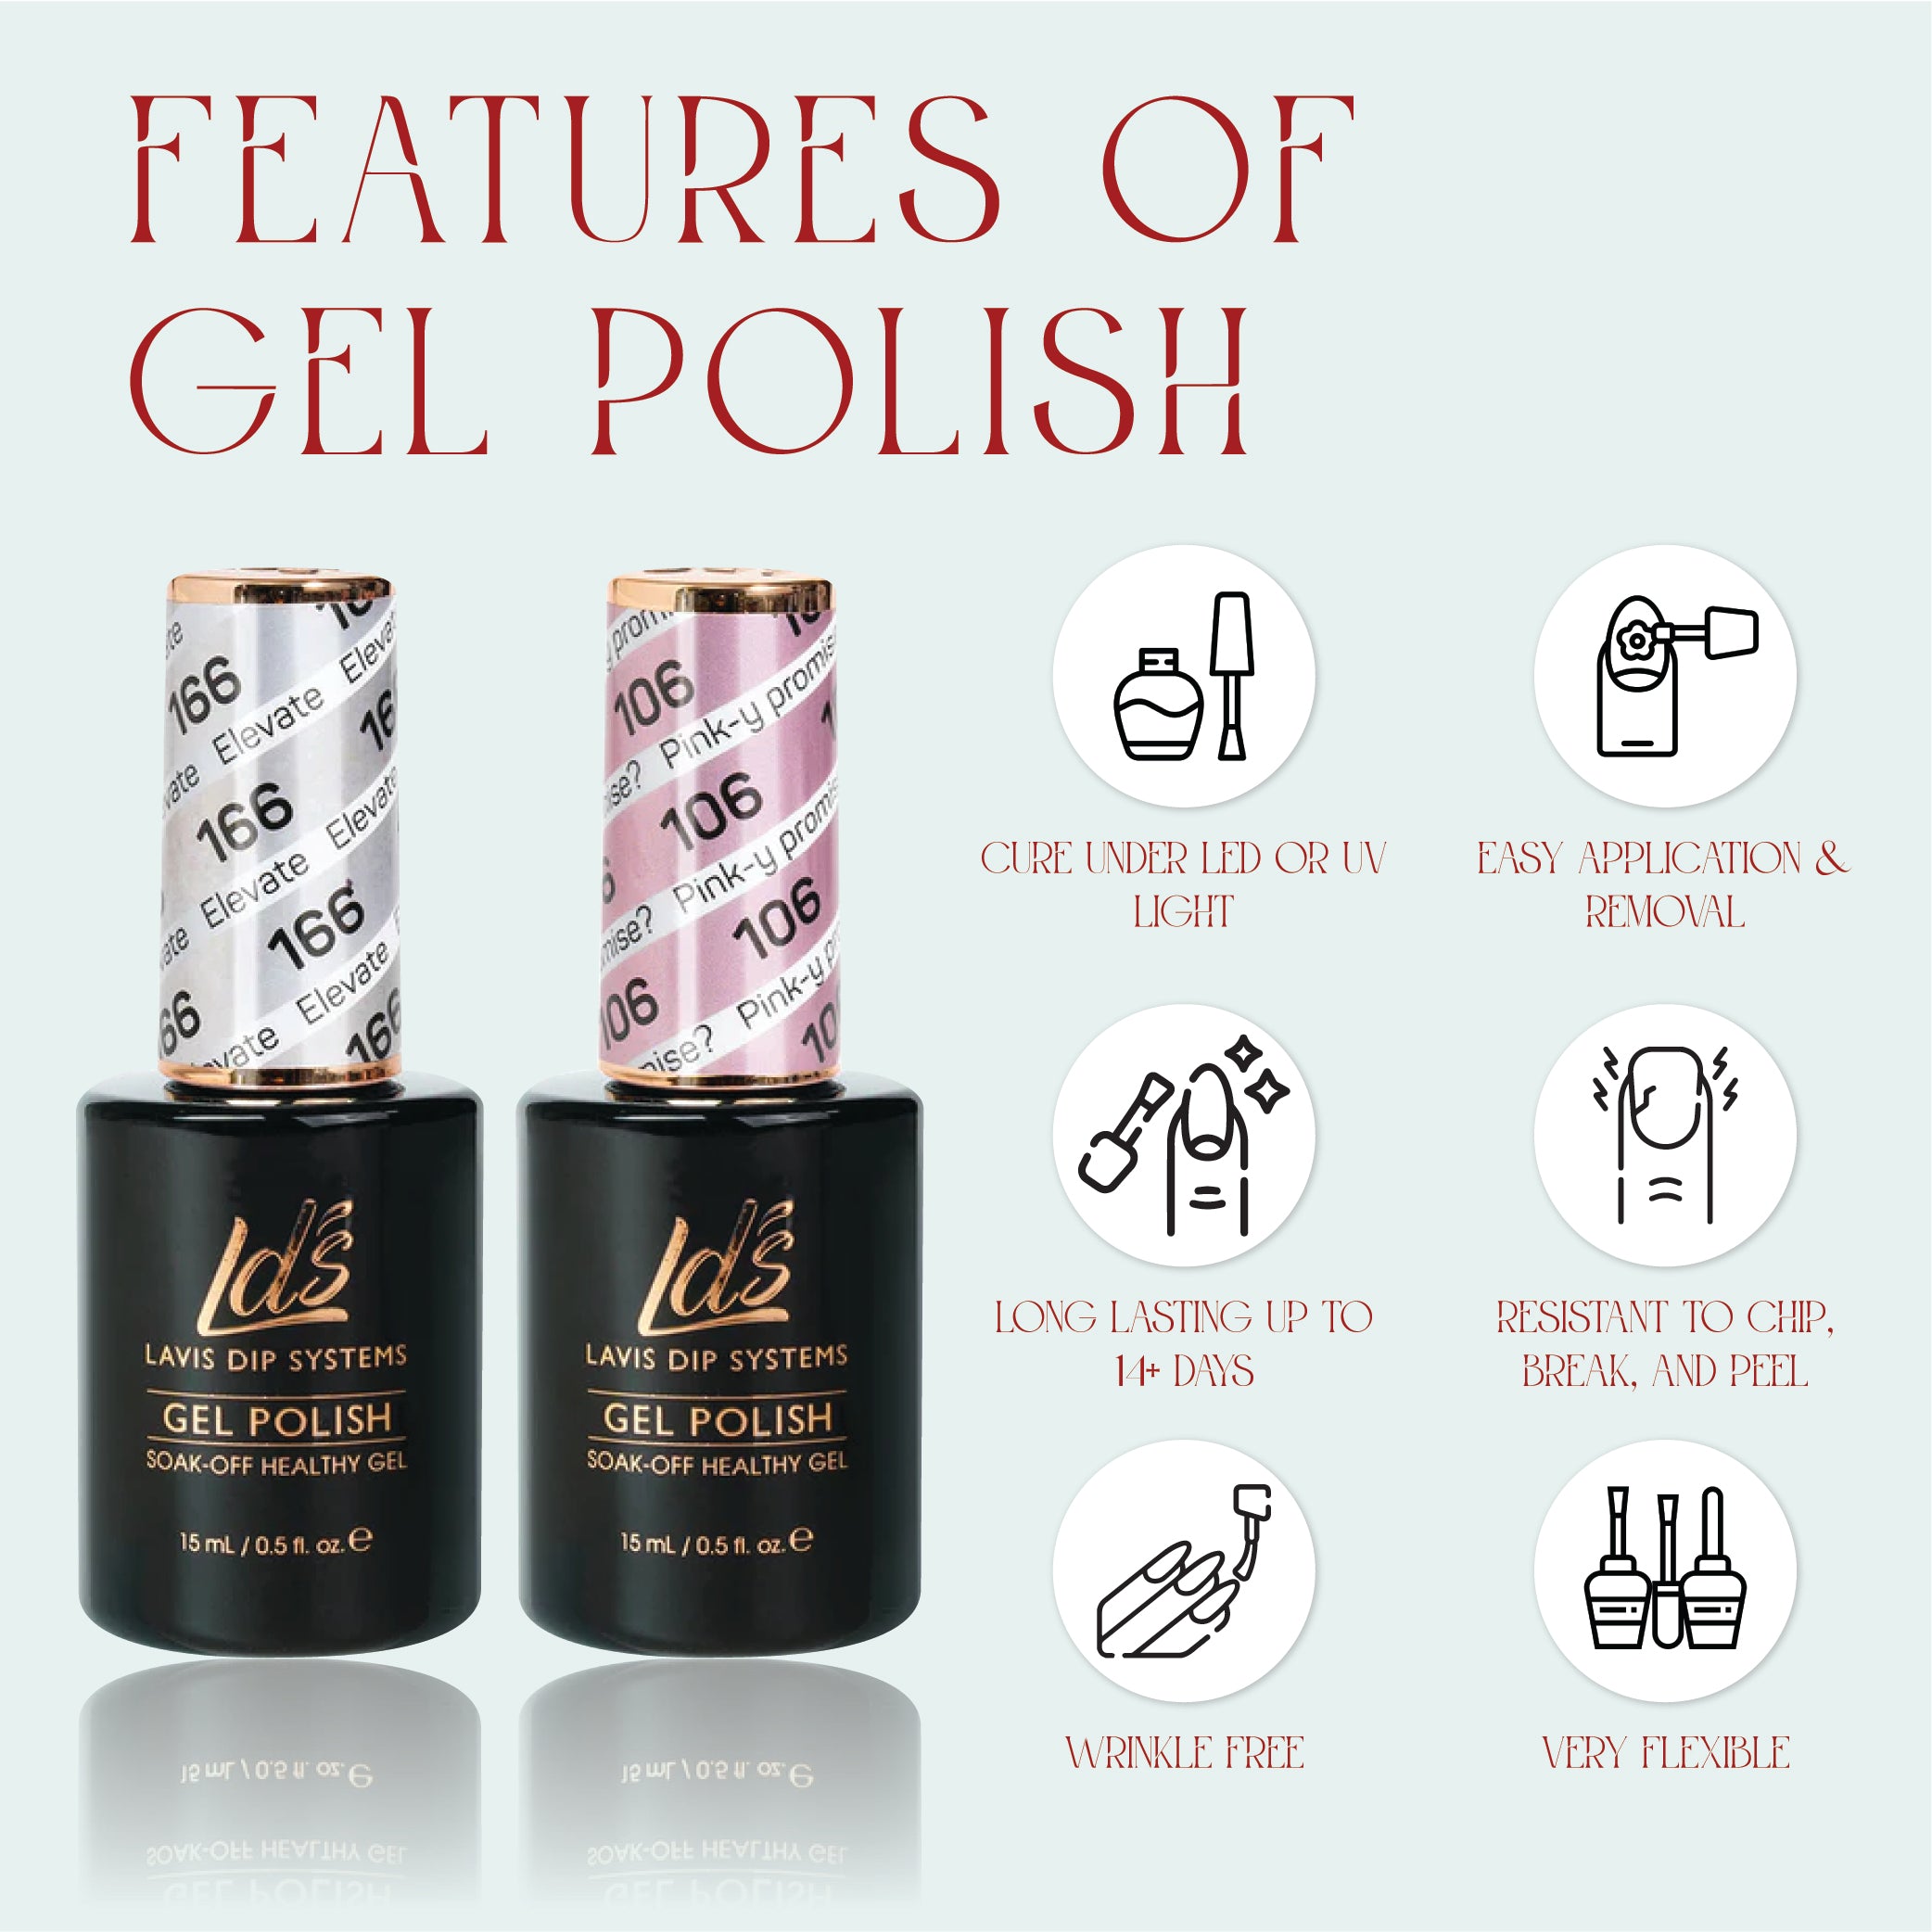 LDS Gel Nail Polish Duo - 158 Black, Glitter Colors - Starry, Starry Night